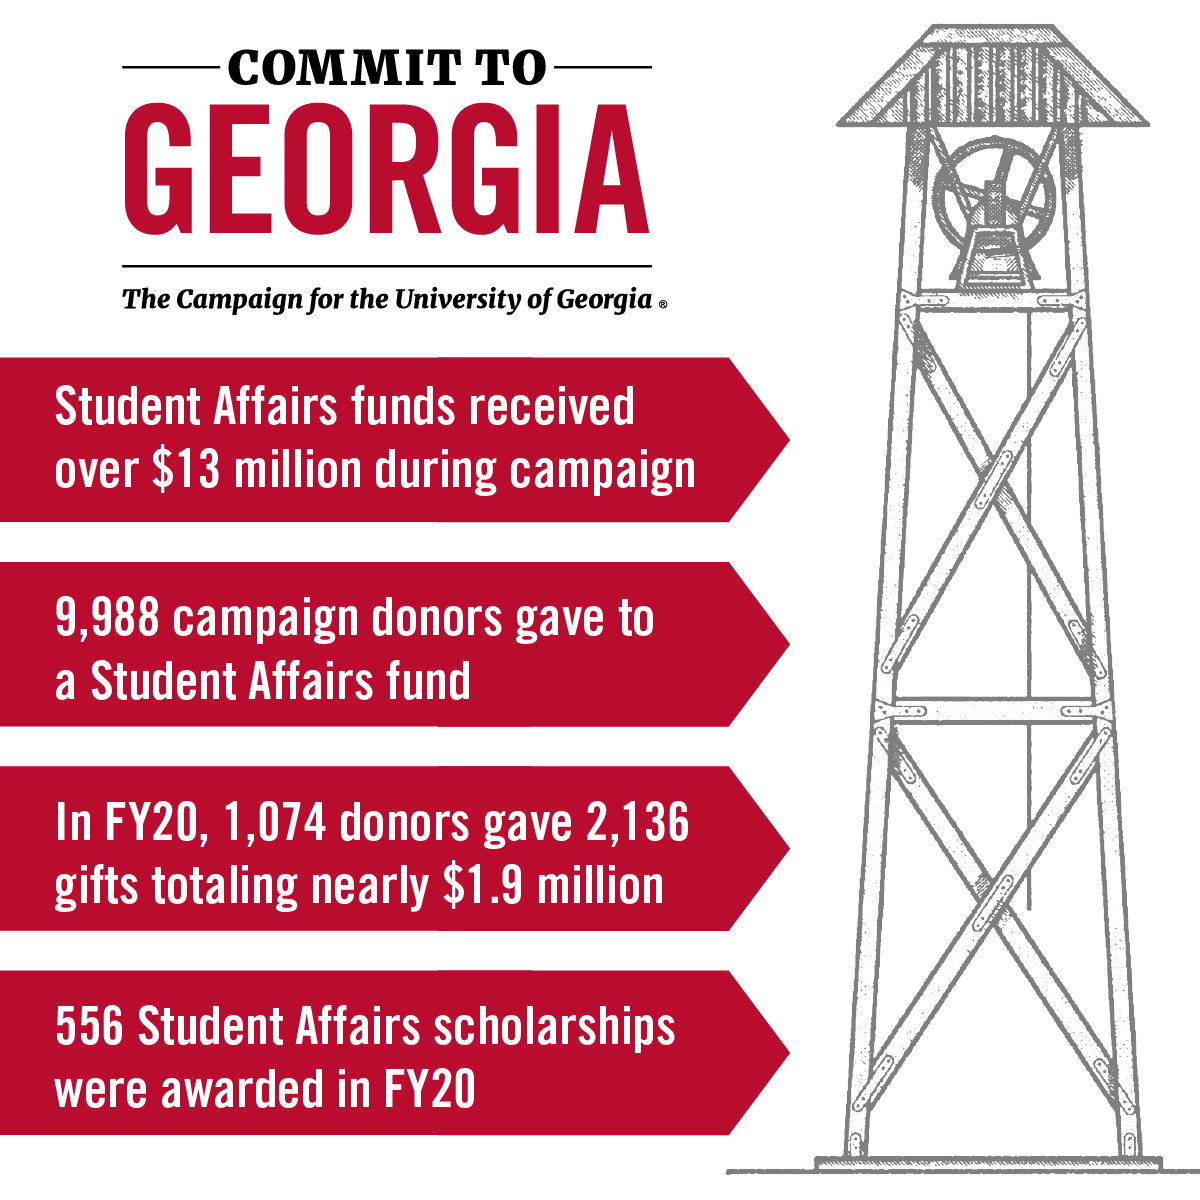 As part of the Commit to Georgia Campaign, UGA Student Affairs received over $13 million in donations from alumni and friends. This commitment is only the beginning of enhancing the engagement, intellect and character of each UGA student. #CommitToGeorgia